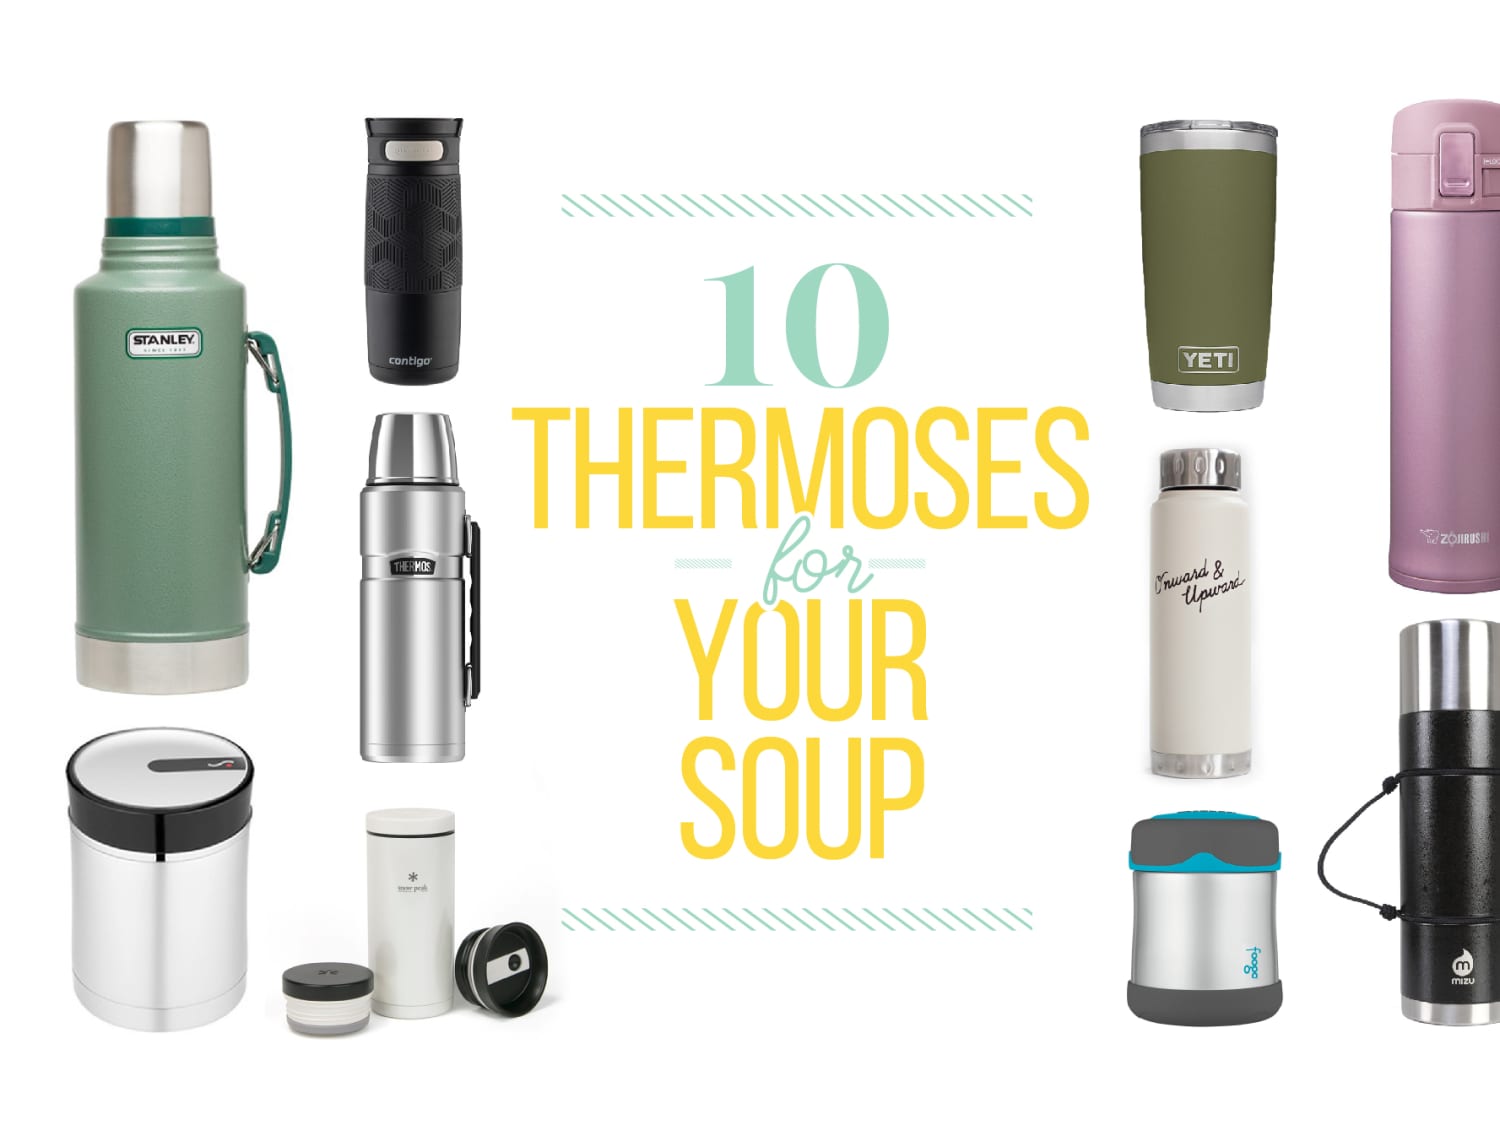 10 Stylish Thermoses to Keep Your Soup Hot